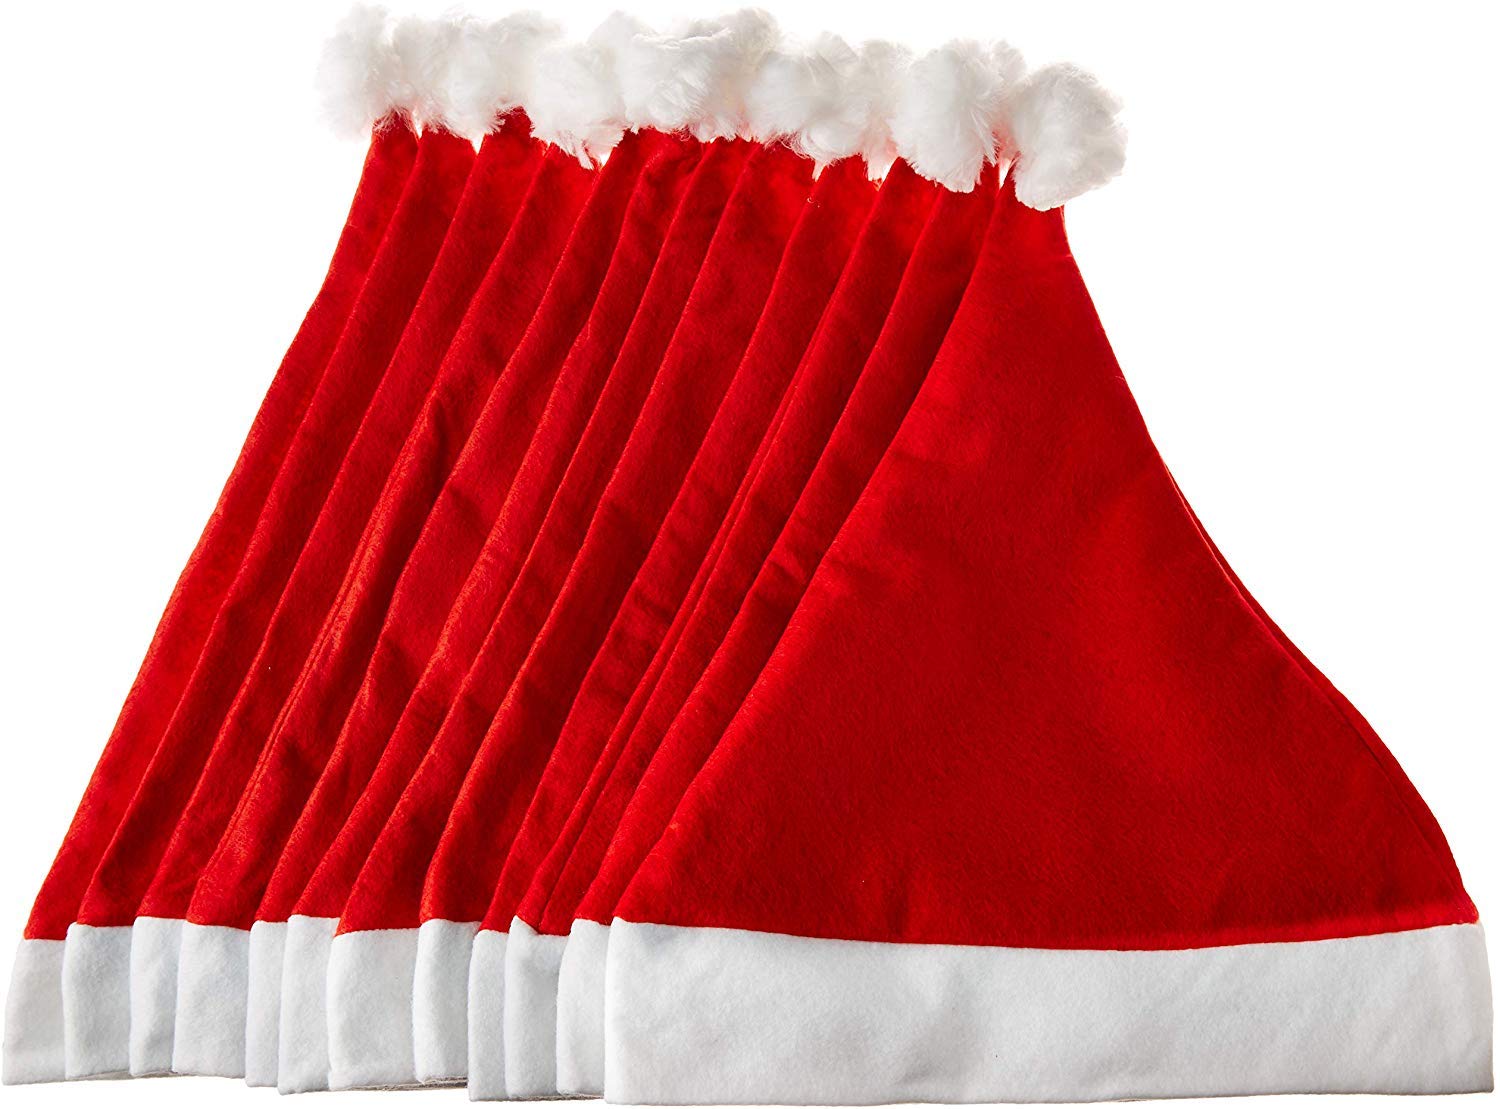 eCraftIndia Red and White Merry Christmas Hats, Santa Claus Caps for kids and Adults - Free Size XMAS Caps, Santa Claus Hats for Christmas, New Year, Festive Holiday Party (Set of 9) 4